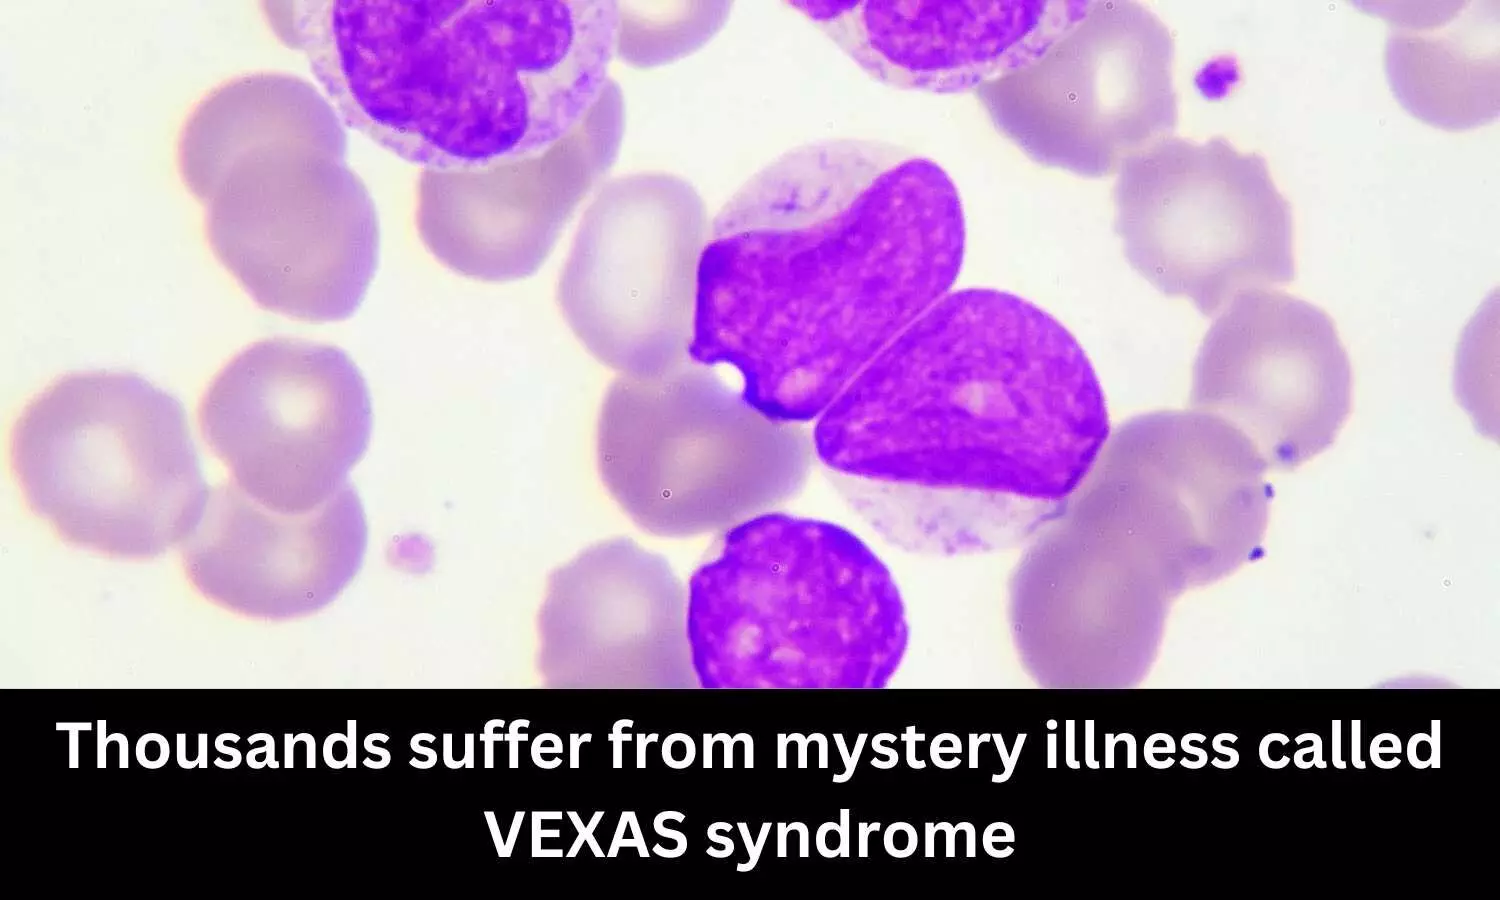 Thousands suffer from mystery illness called VEXAS syndrome